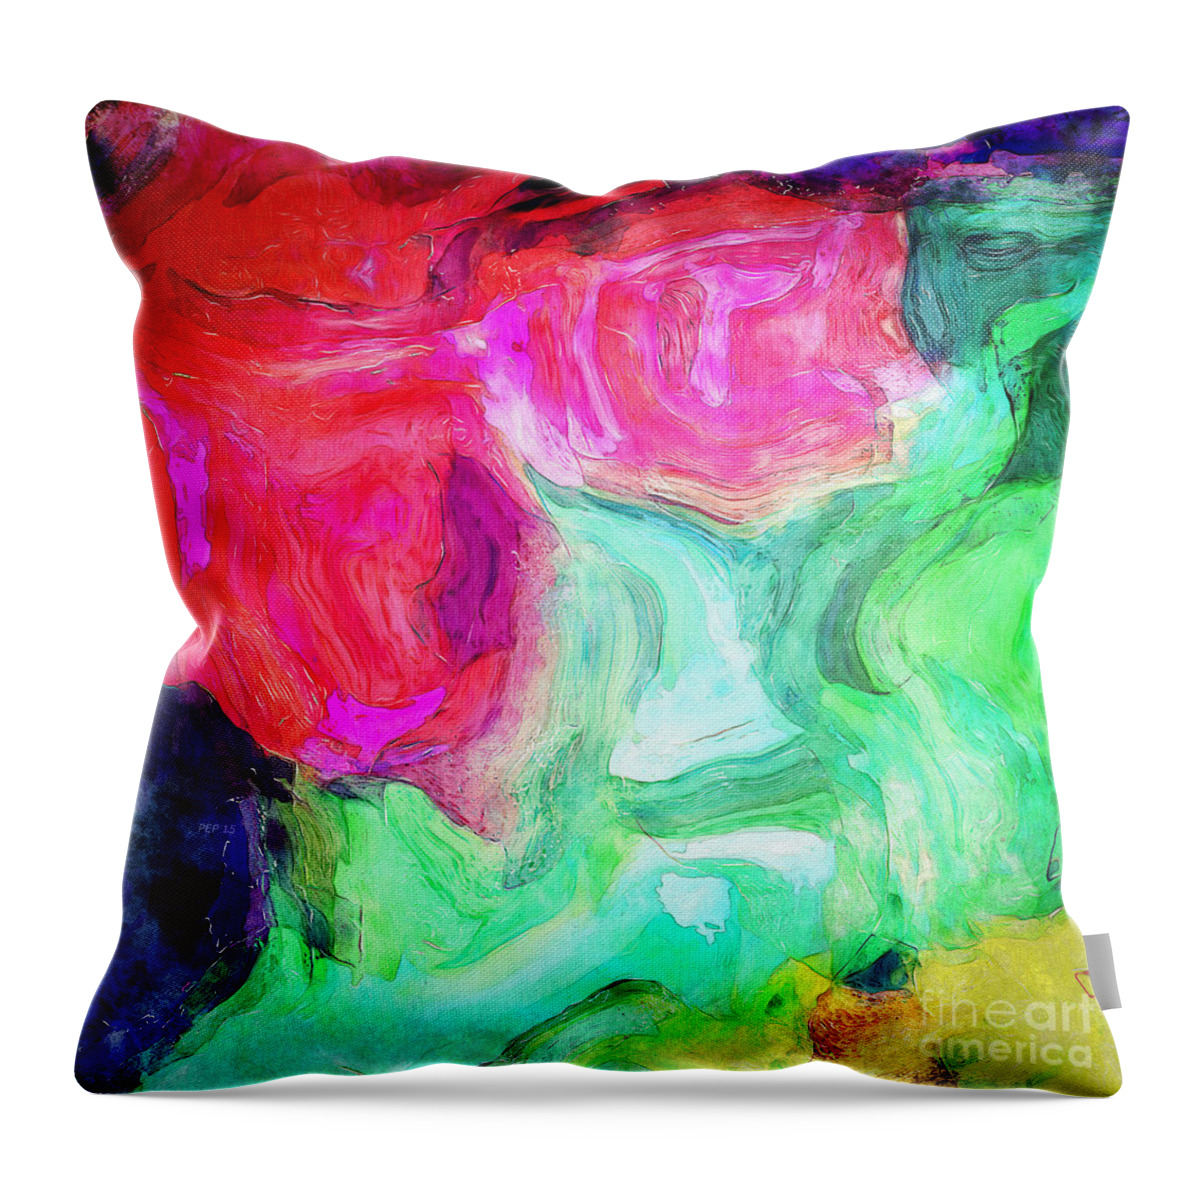 Digital Painting Throw Pillow featuring the digital art Untitled Colorful Abstract by Phil Perkins